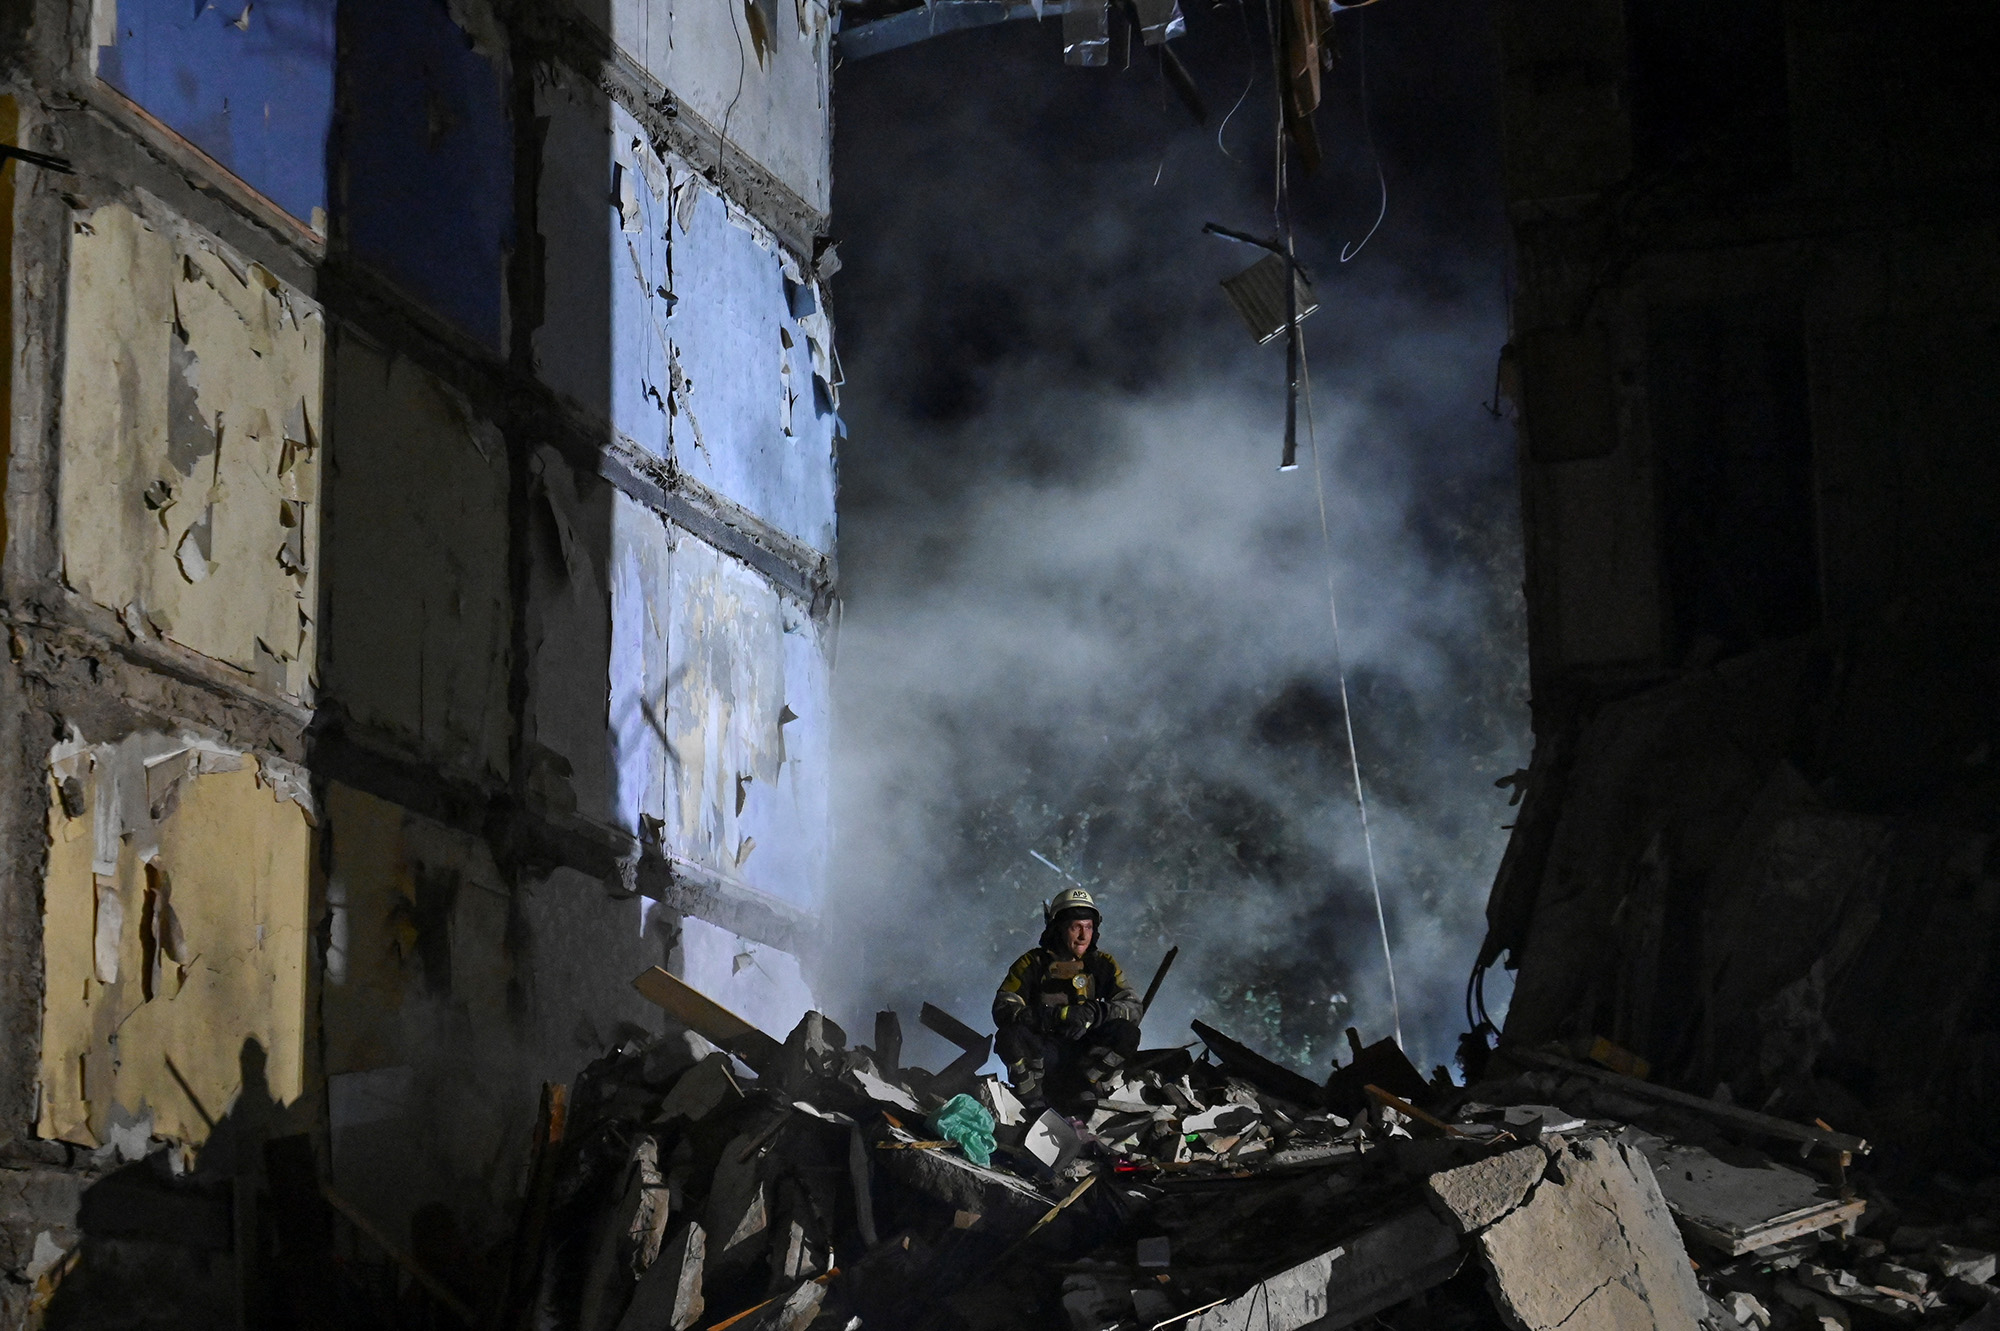 A rescue worker stands in the debris of a residential building heavily damaged by a Russian missile strike in Zaporizhzhia, Ukraine on October 9.